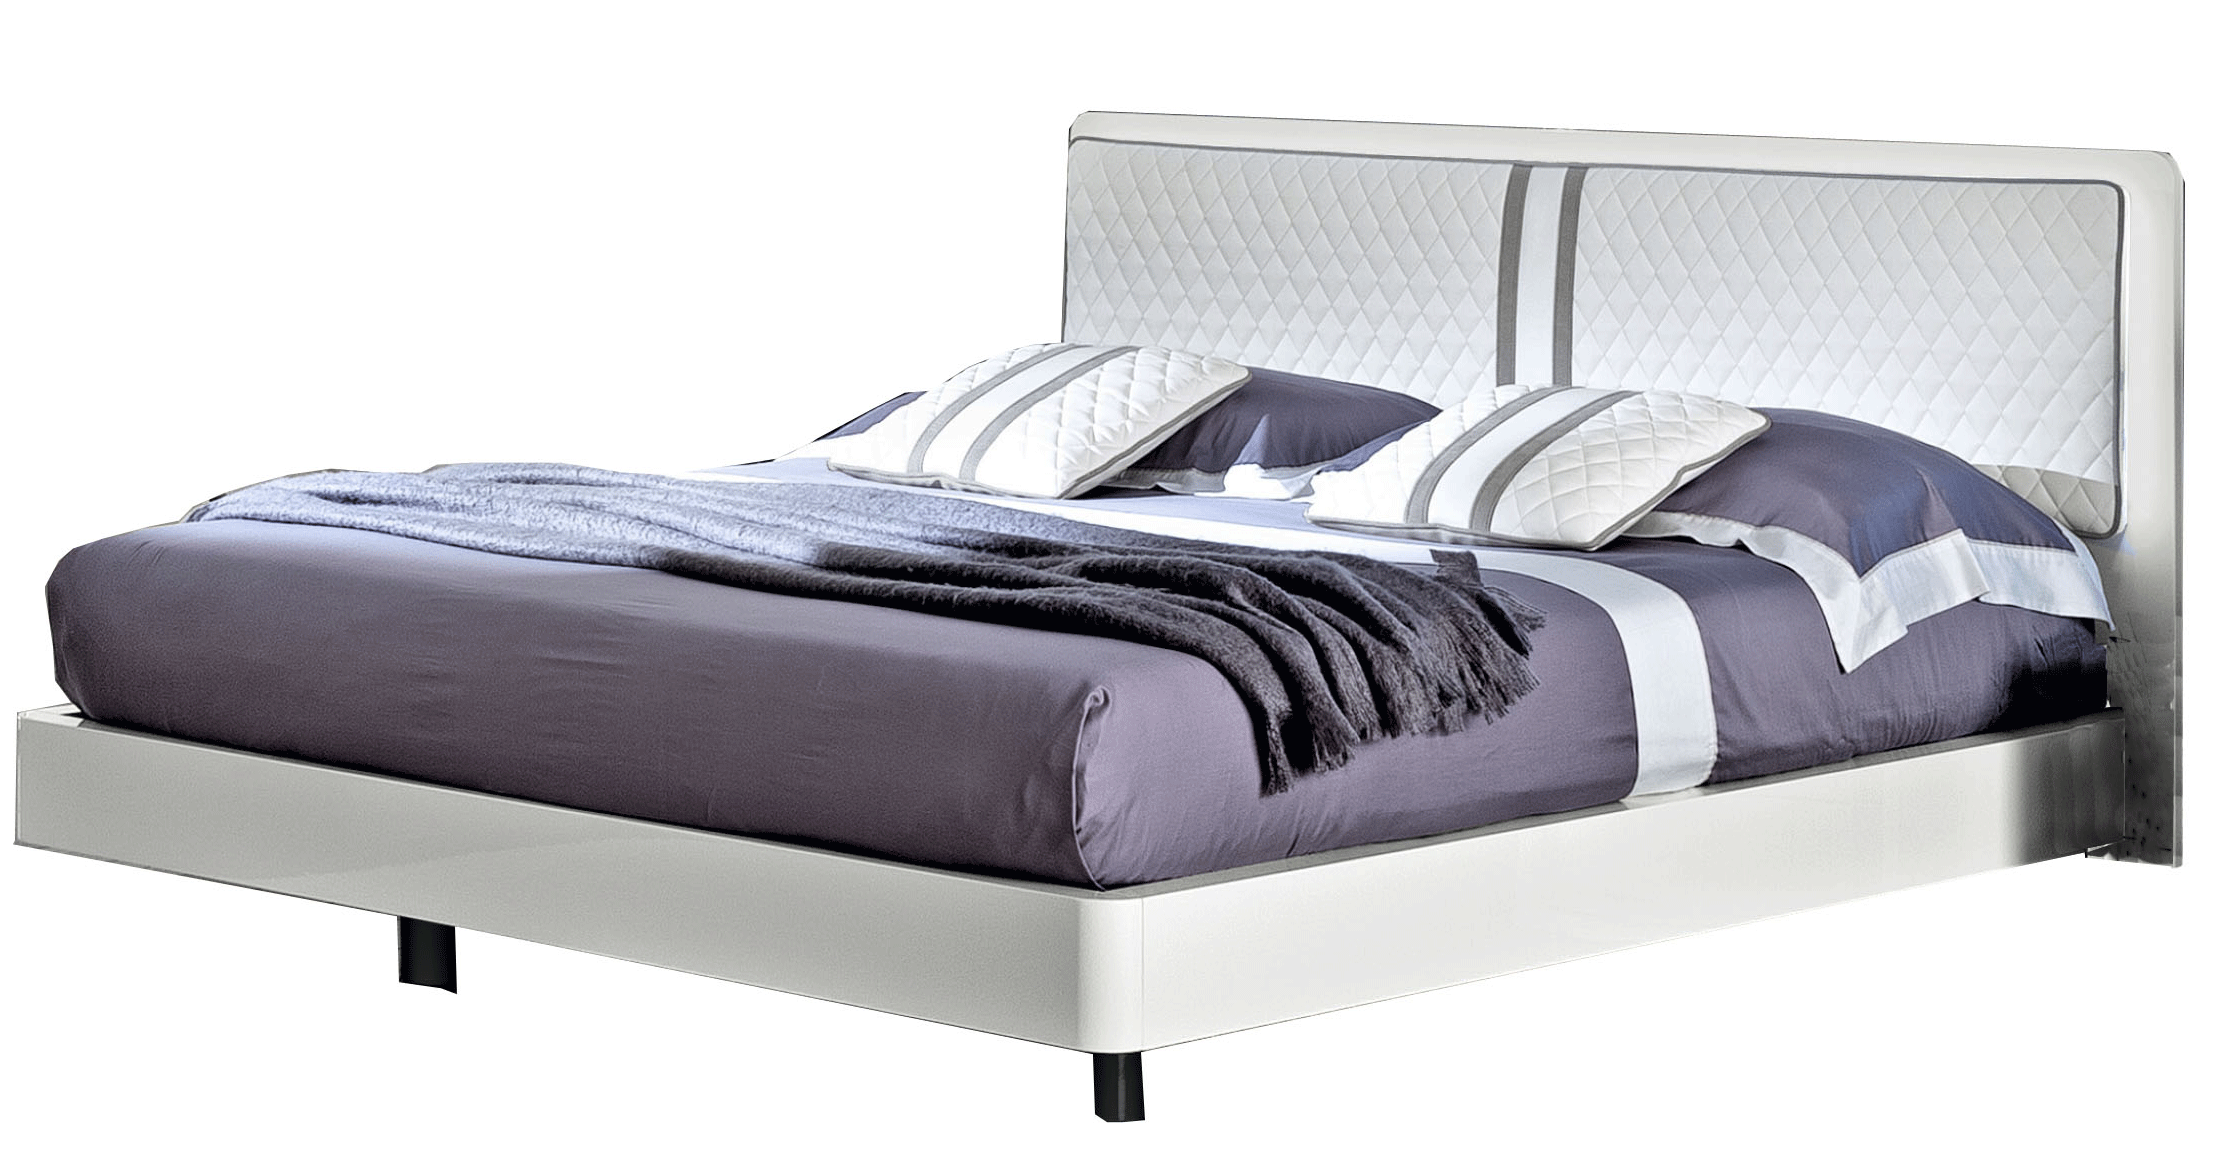 Brands Camel Classic Collection, Italy Dama Bianca Bed